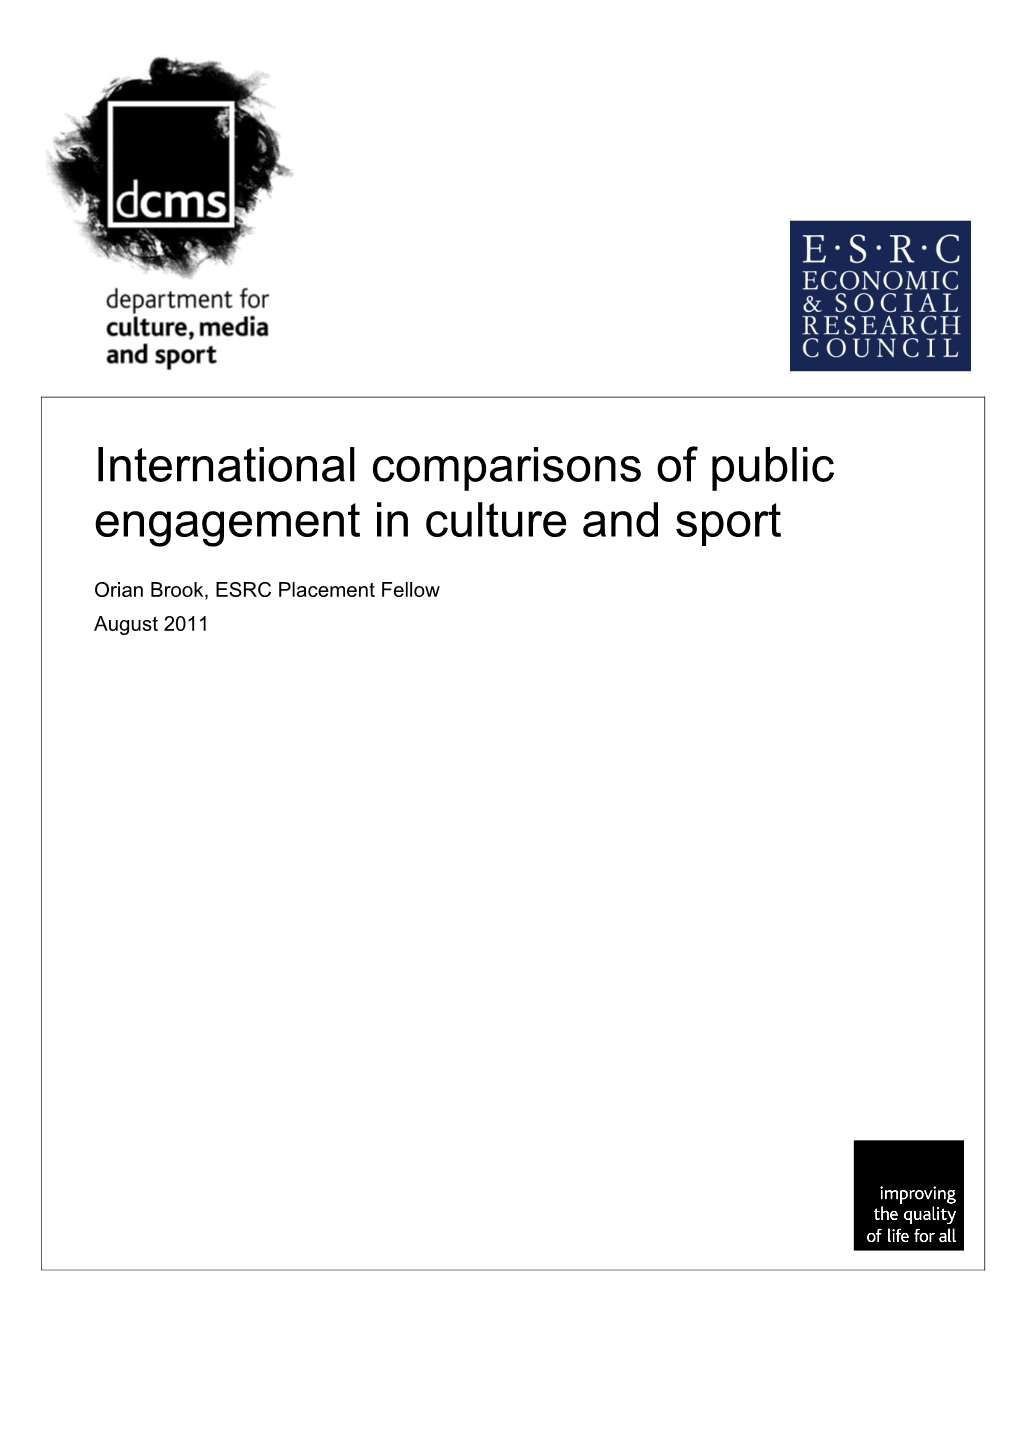 International Comparisons of Public Engagement in Culture and Sport Part 1